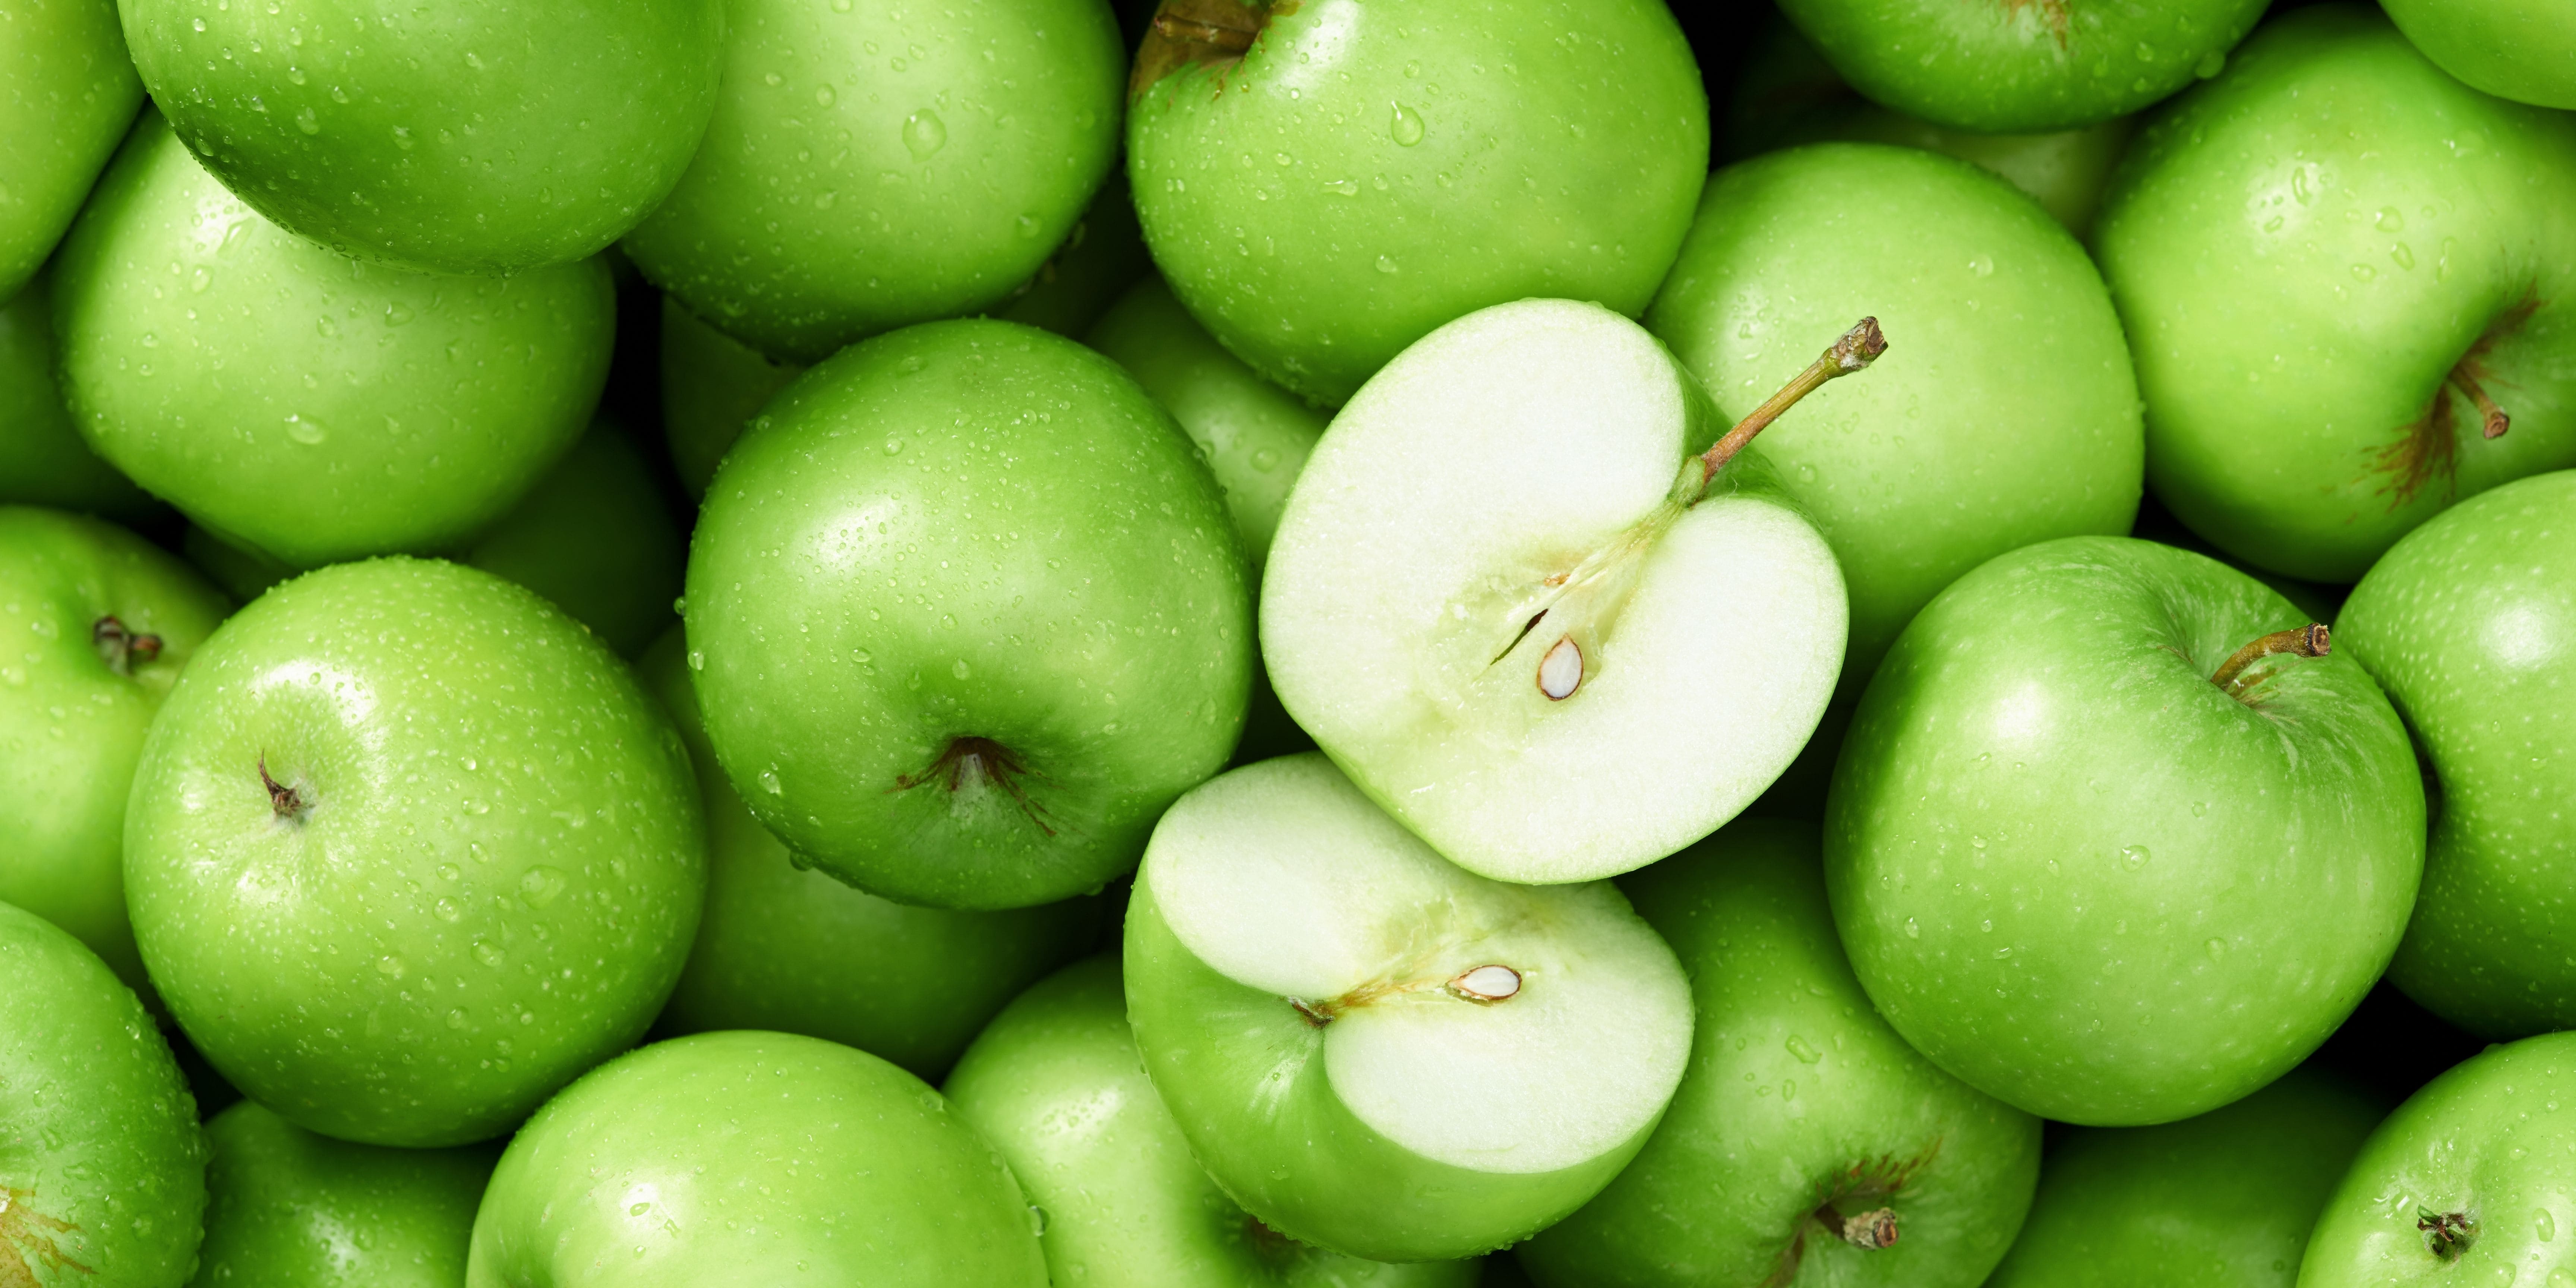 Green apples being stored with one apple cut open